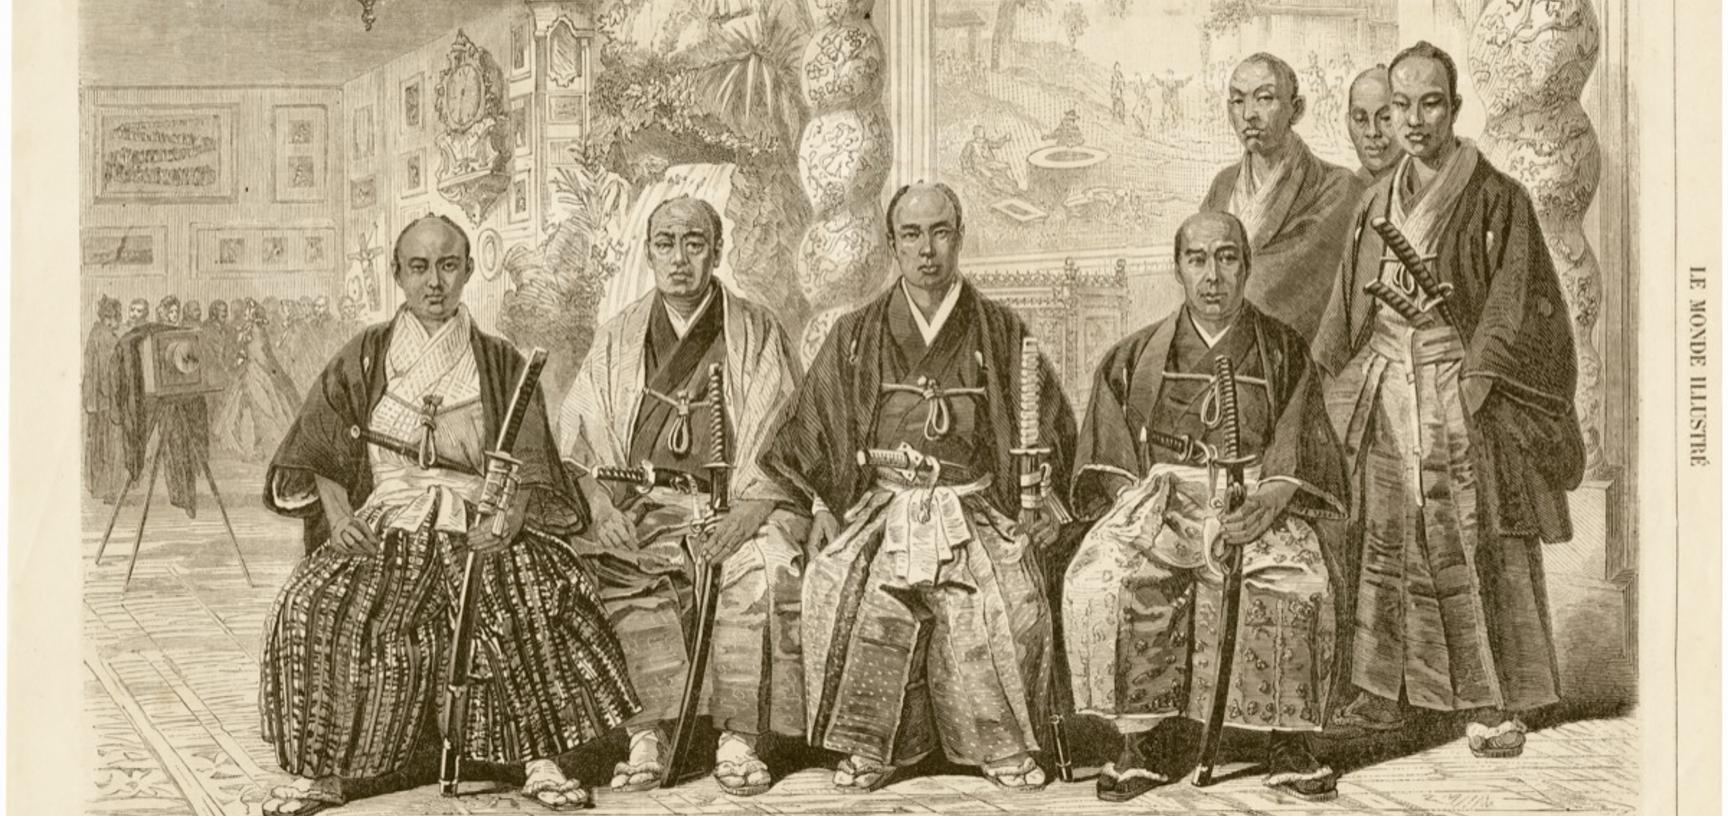 Members of the Takenouchi mission to Europe (1862), pictured wearing traditional dress and each carrying a daishō or pair of swords (katana and wakizashi). This engraving, published in Le Monde illustré, was based on photographs taken in the Paris studio 